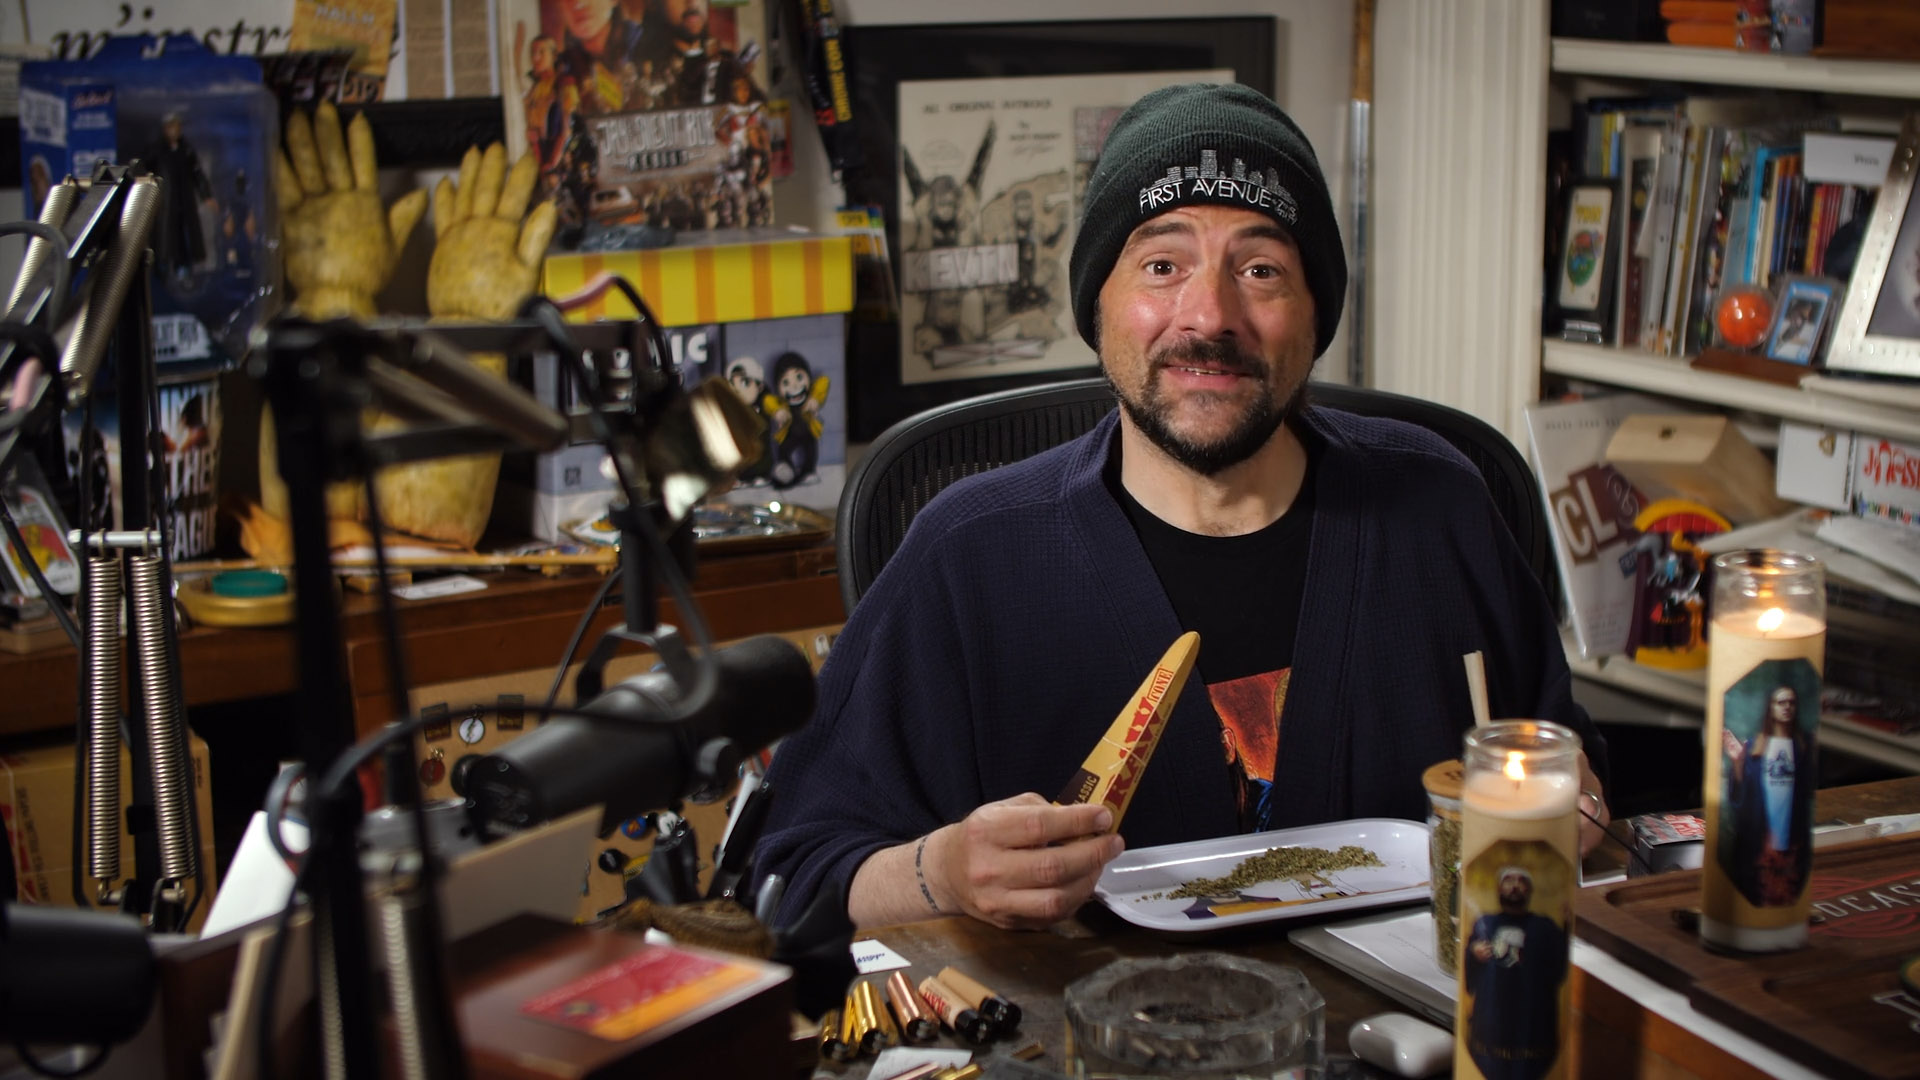 WAKE AND BAKE : EPISODE 2 - That Kevin Smith Club